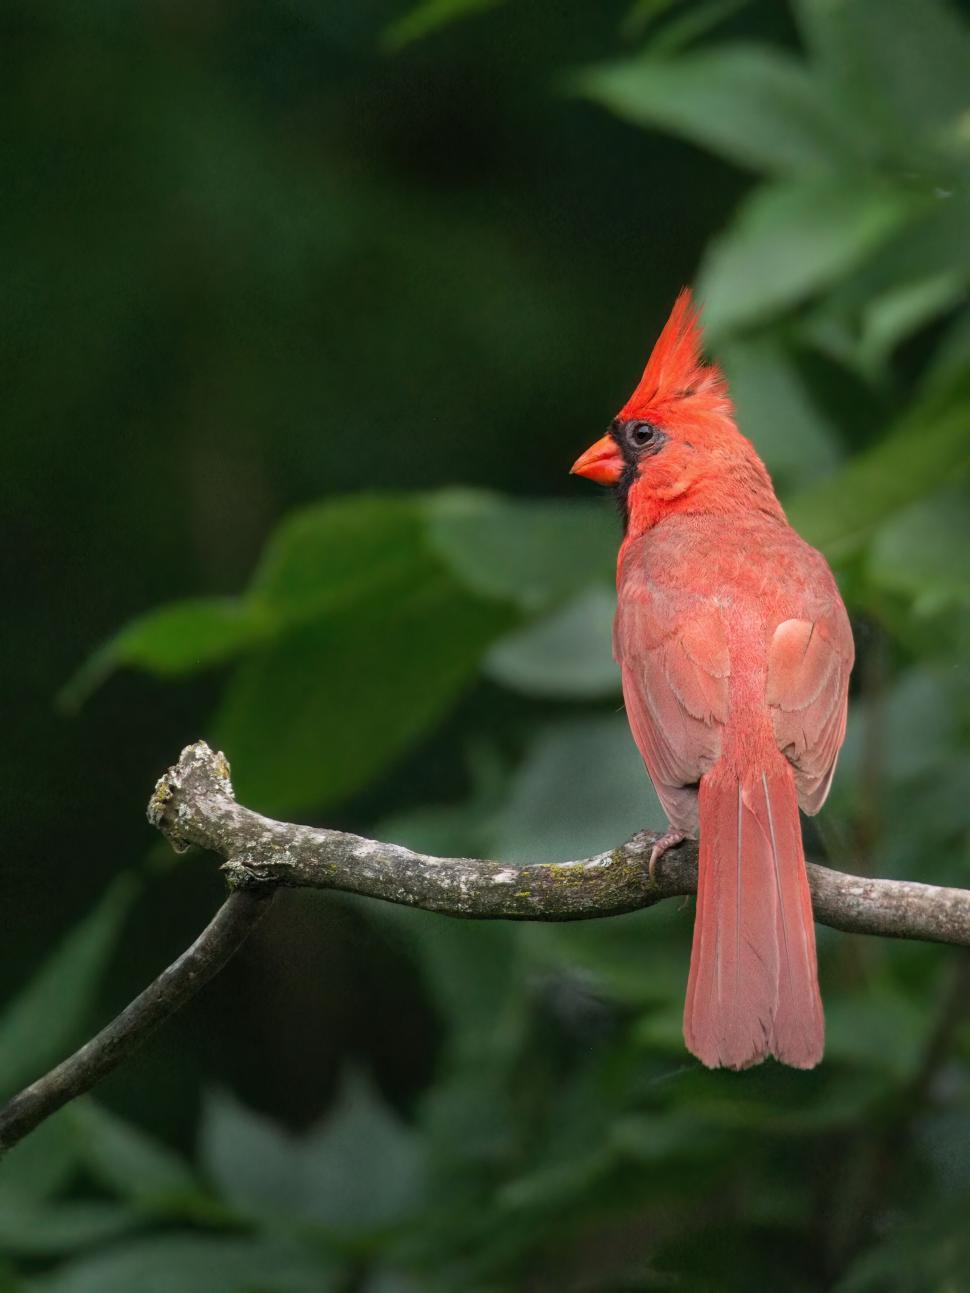 Free Image of Red Northern Cardinal bird on a branch in foliage 